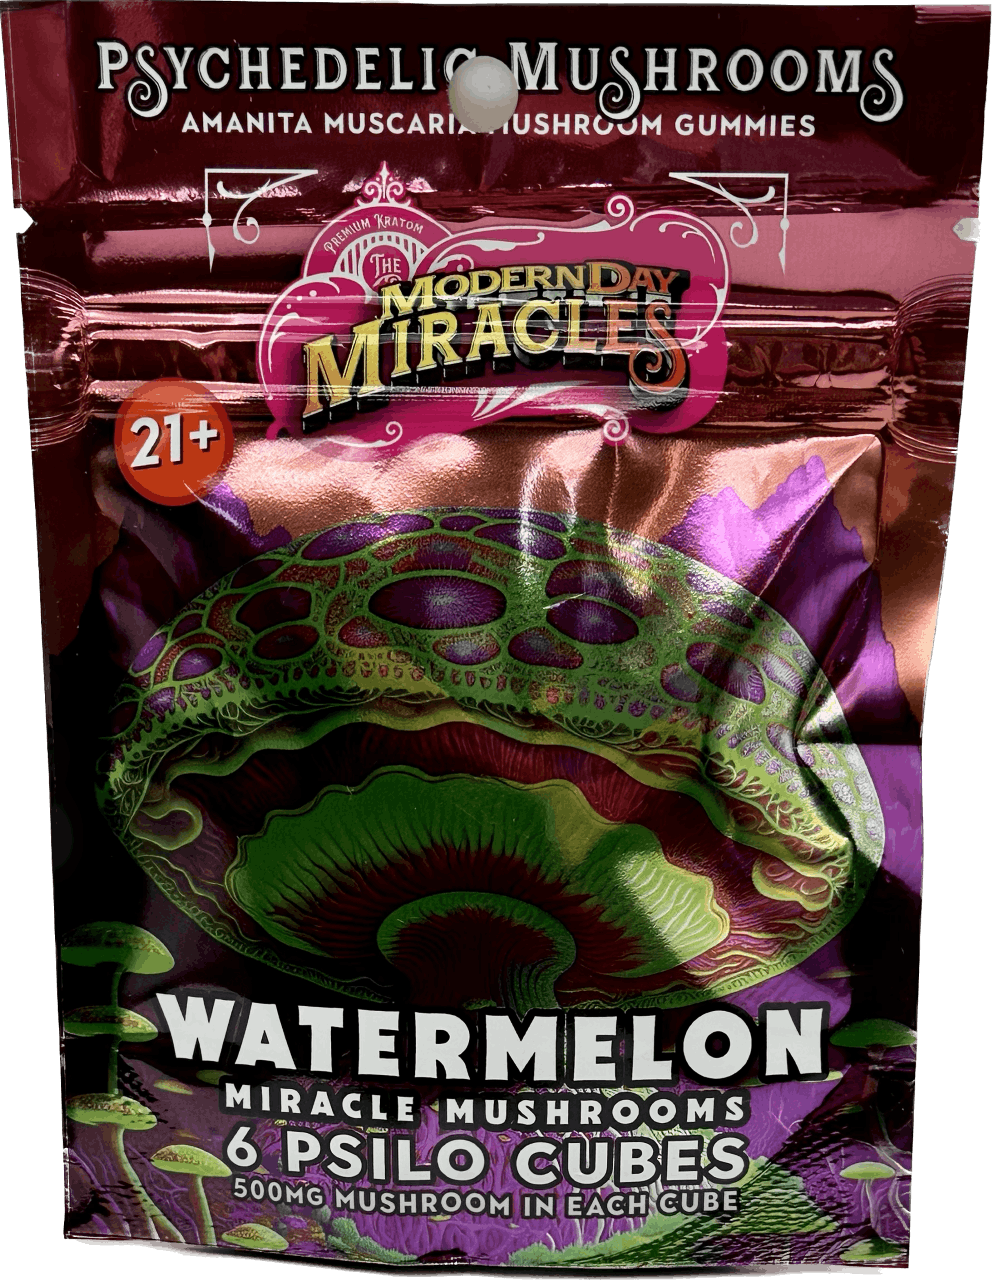 MODERN DAY MIRACLES AMANITA MUSCARIA MUSHROOM GUMMY CUBES 6 CT 500 MG WATERMELON FLAVORED